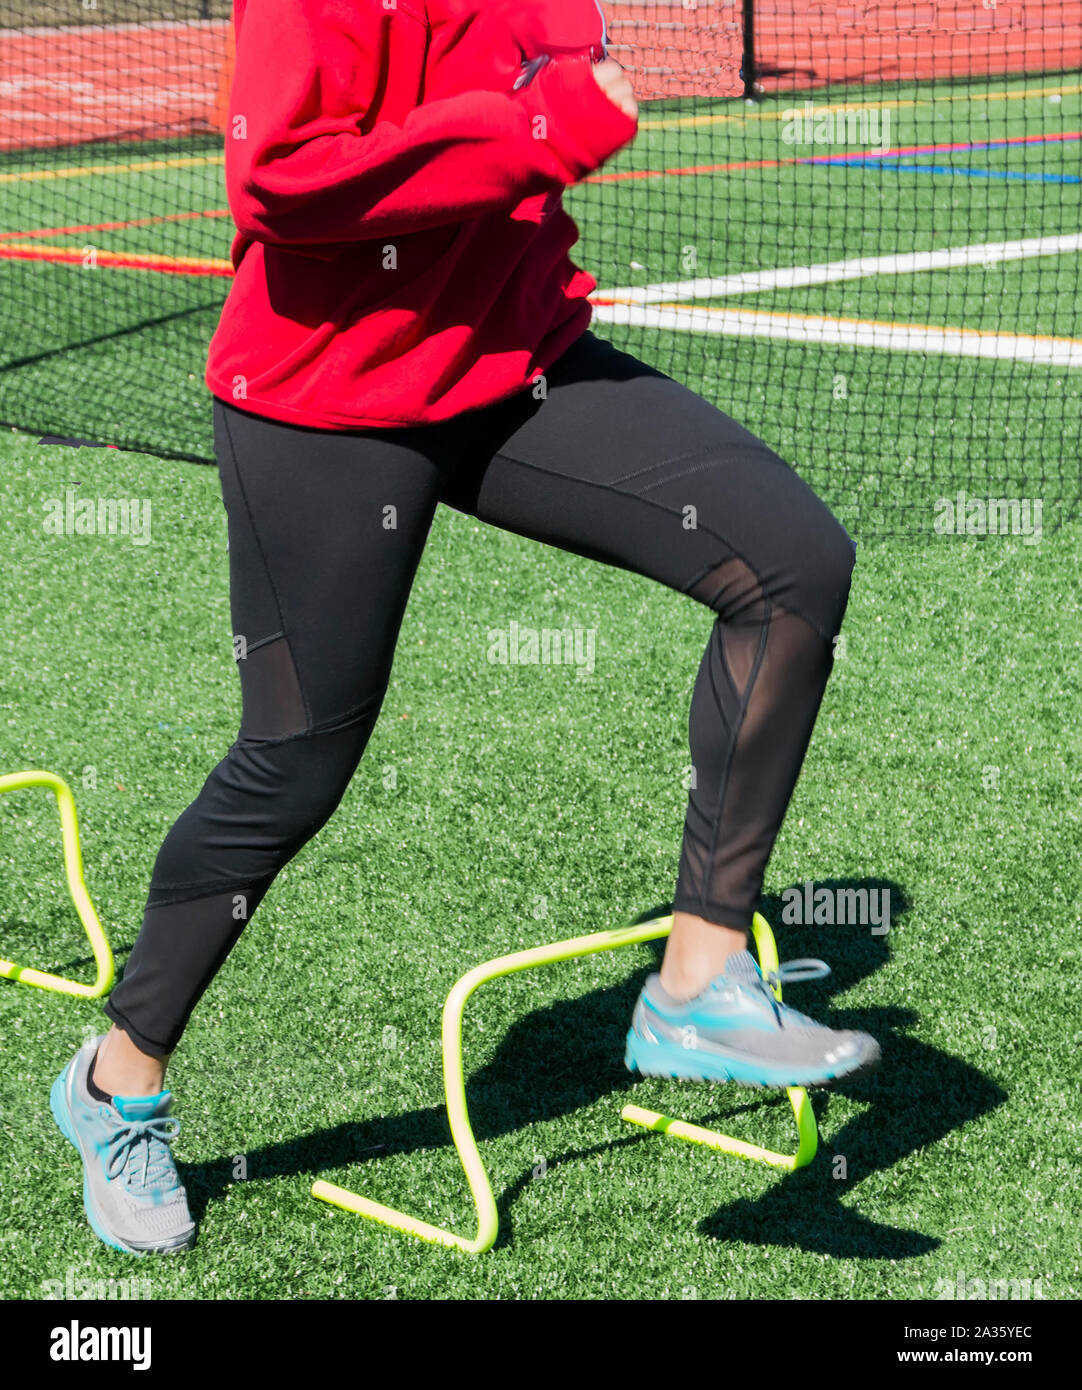 A high school athlete is stepping, running, over yellow mini hurdles during strength and speed training practice on a green turf field. Stock Photo